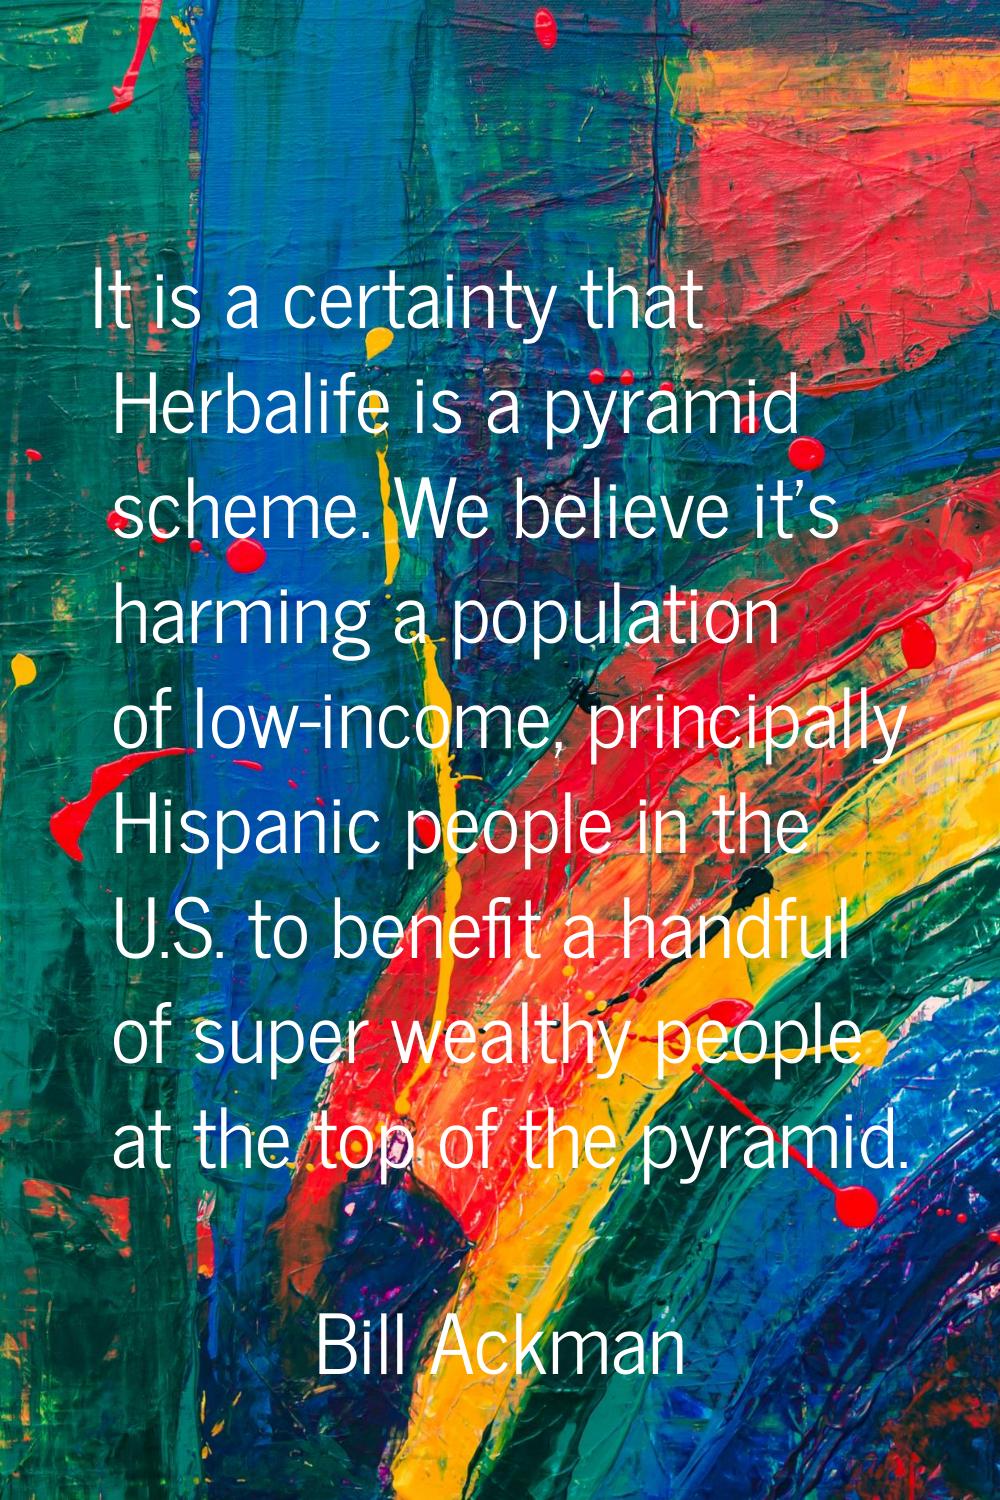 It is a certainty that Herbalife is a pyramid scheme. We believe it's harming a population of low-i